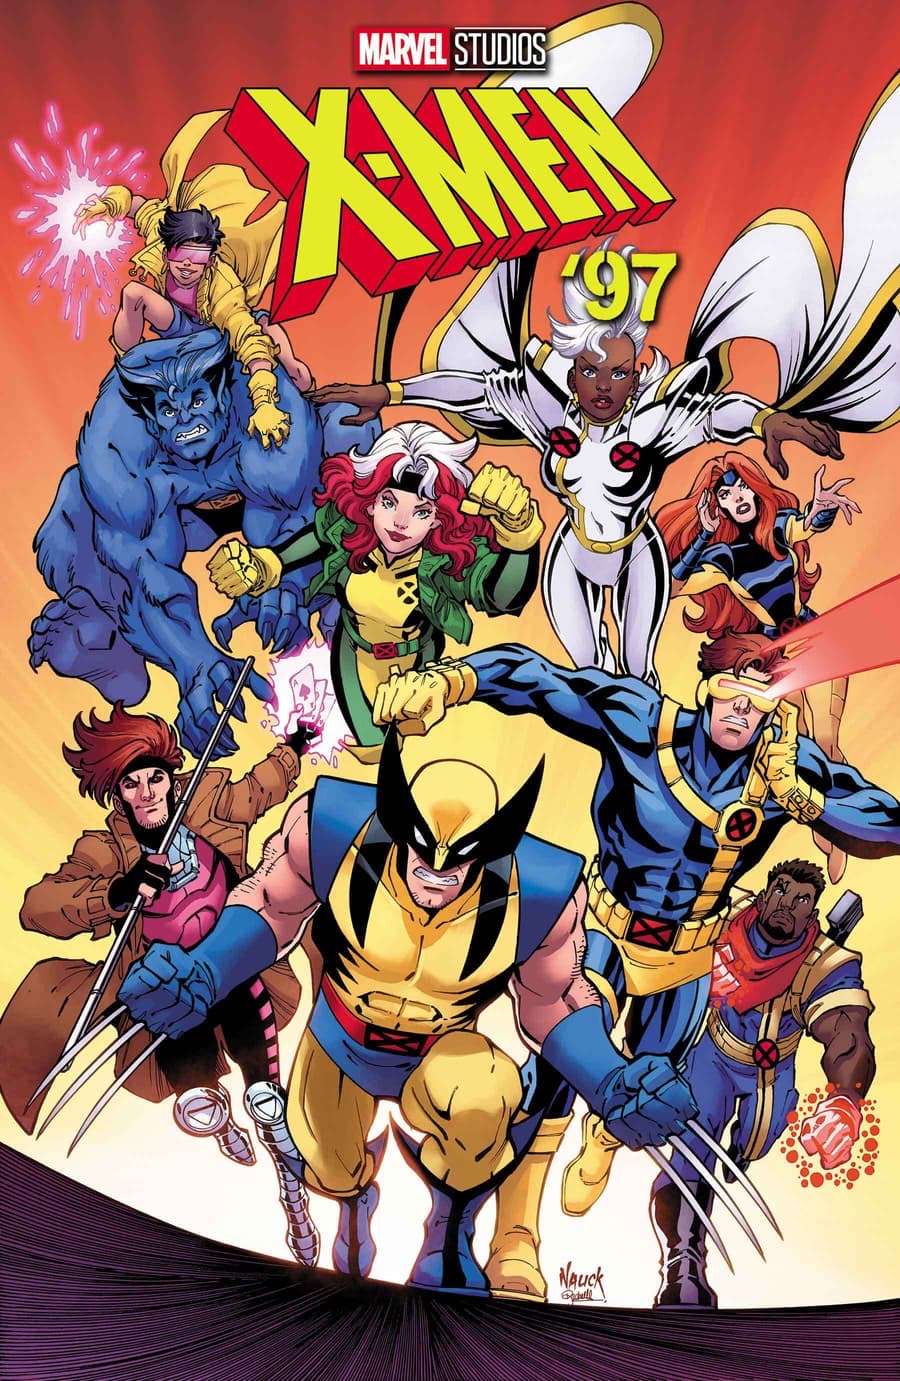 Promotional artwork for Marvel Studios' X-Men '97 featuring an animated group of X-Men characters posed dynamically against a vibrant background, with Wolverine front and center, flanked by fellow mutants all ready for action